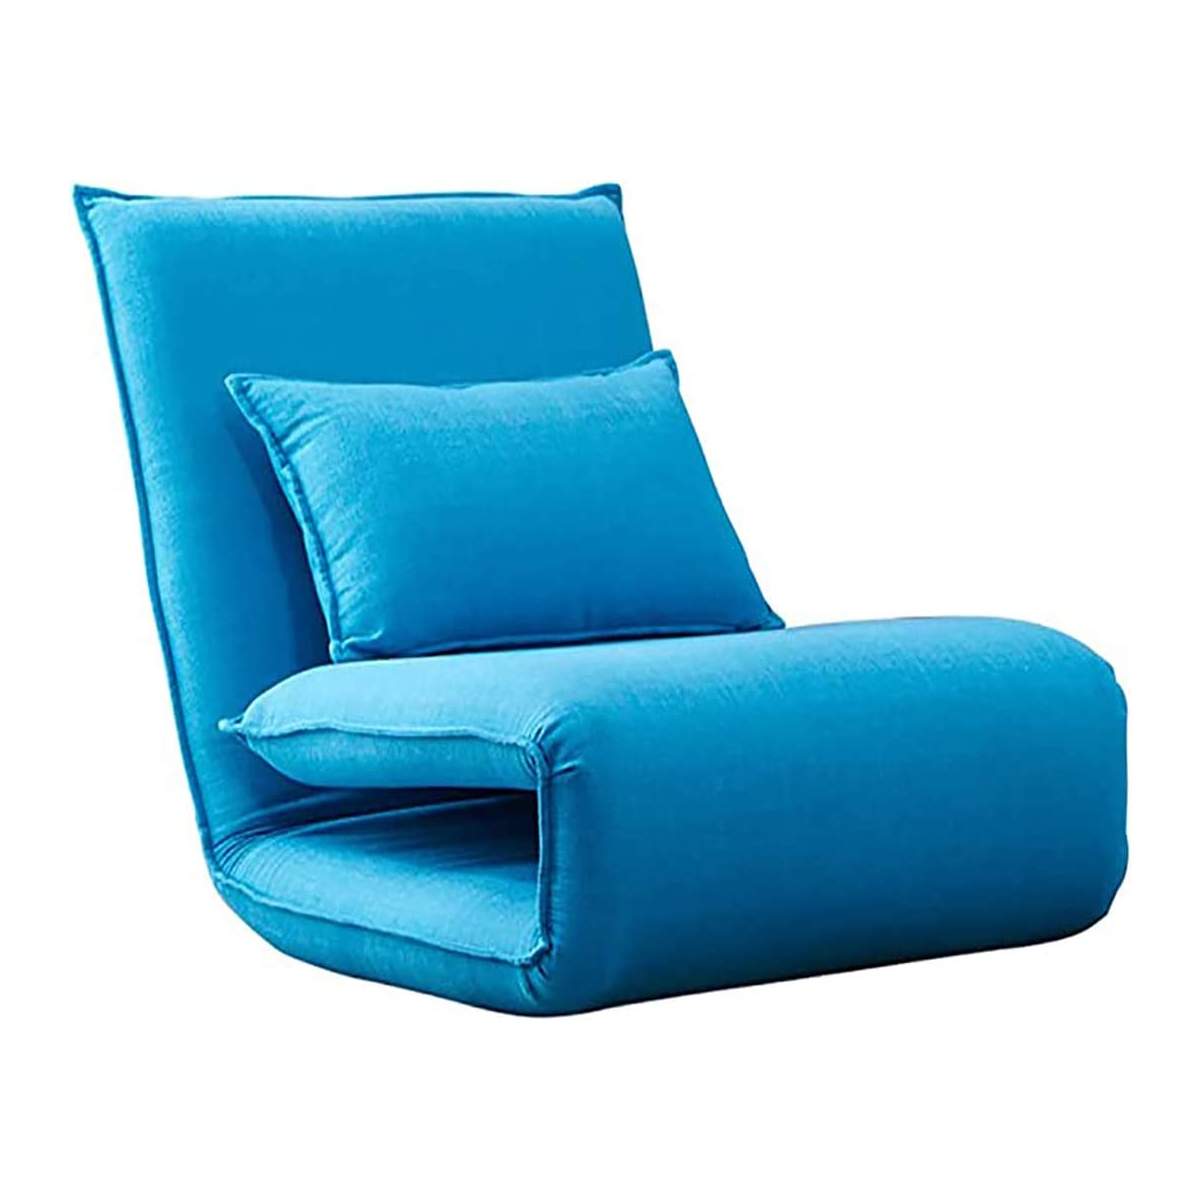 Modern Nordic Rocking Chair Swing Chair Lounge Chair Lazy Chair with soft fabric Cushion - Blue